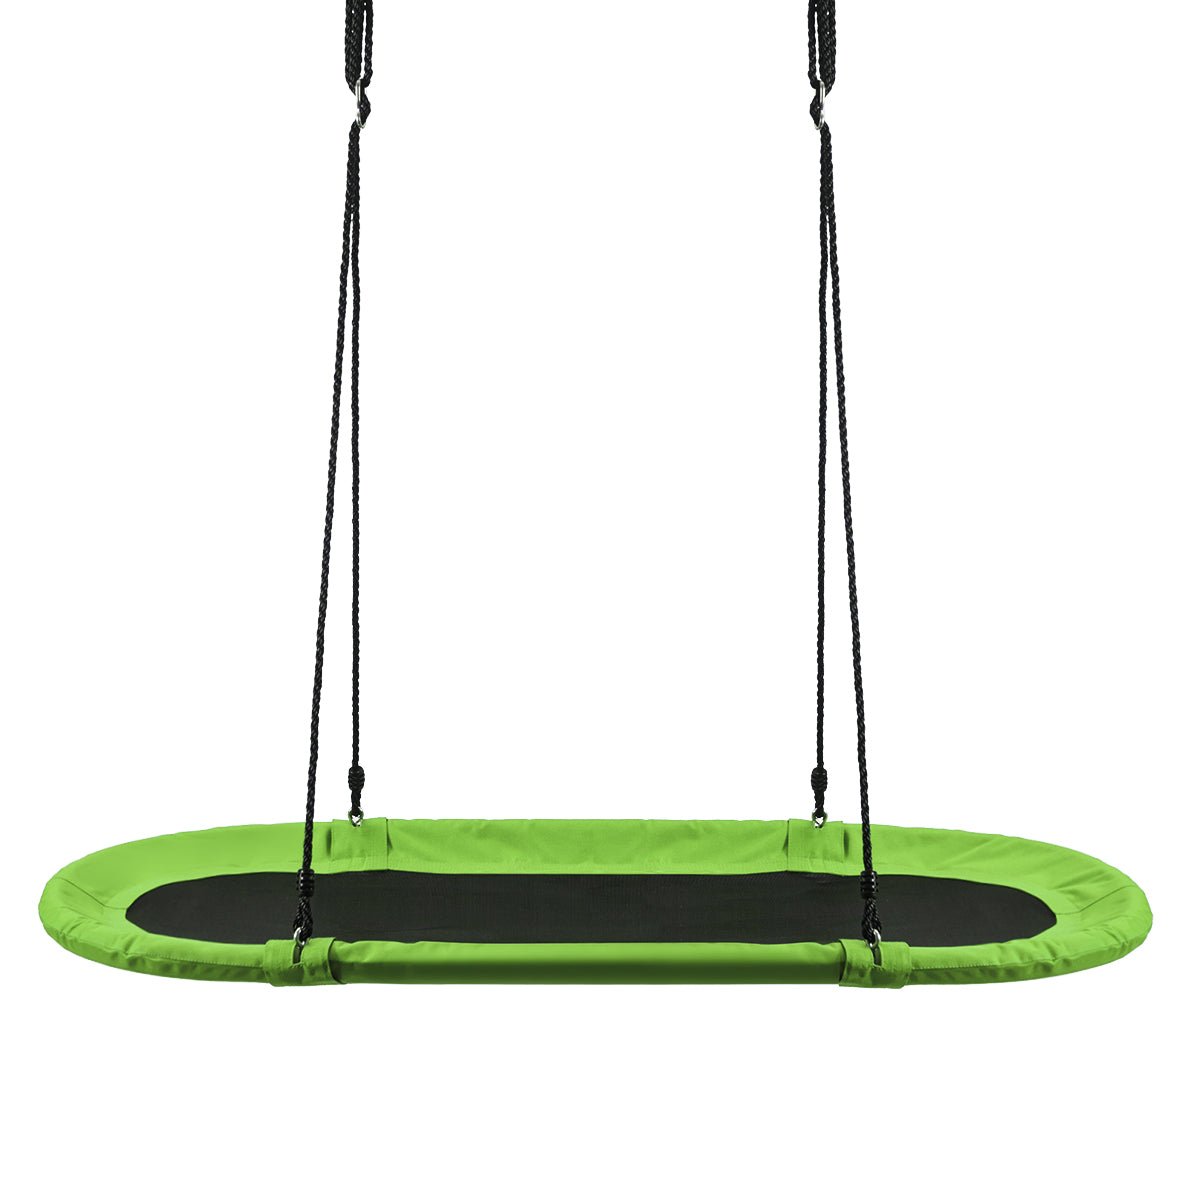 Oval Tree Swing Set: Soar High with Adjustable Hanging Ropes